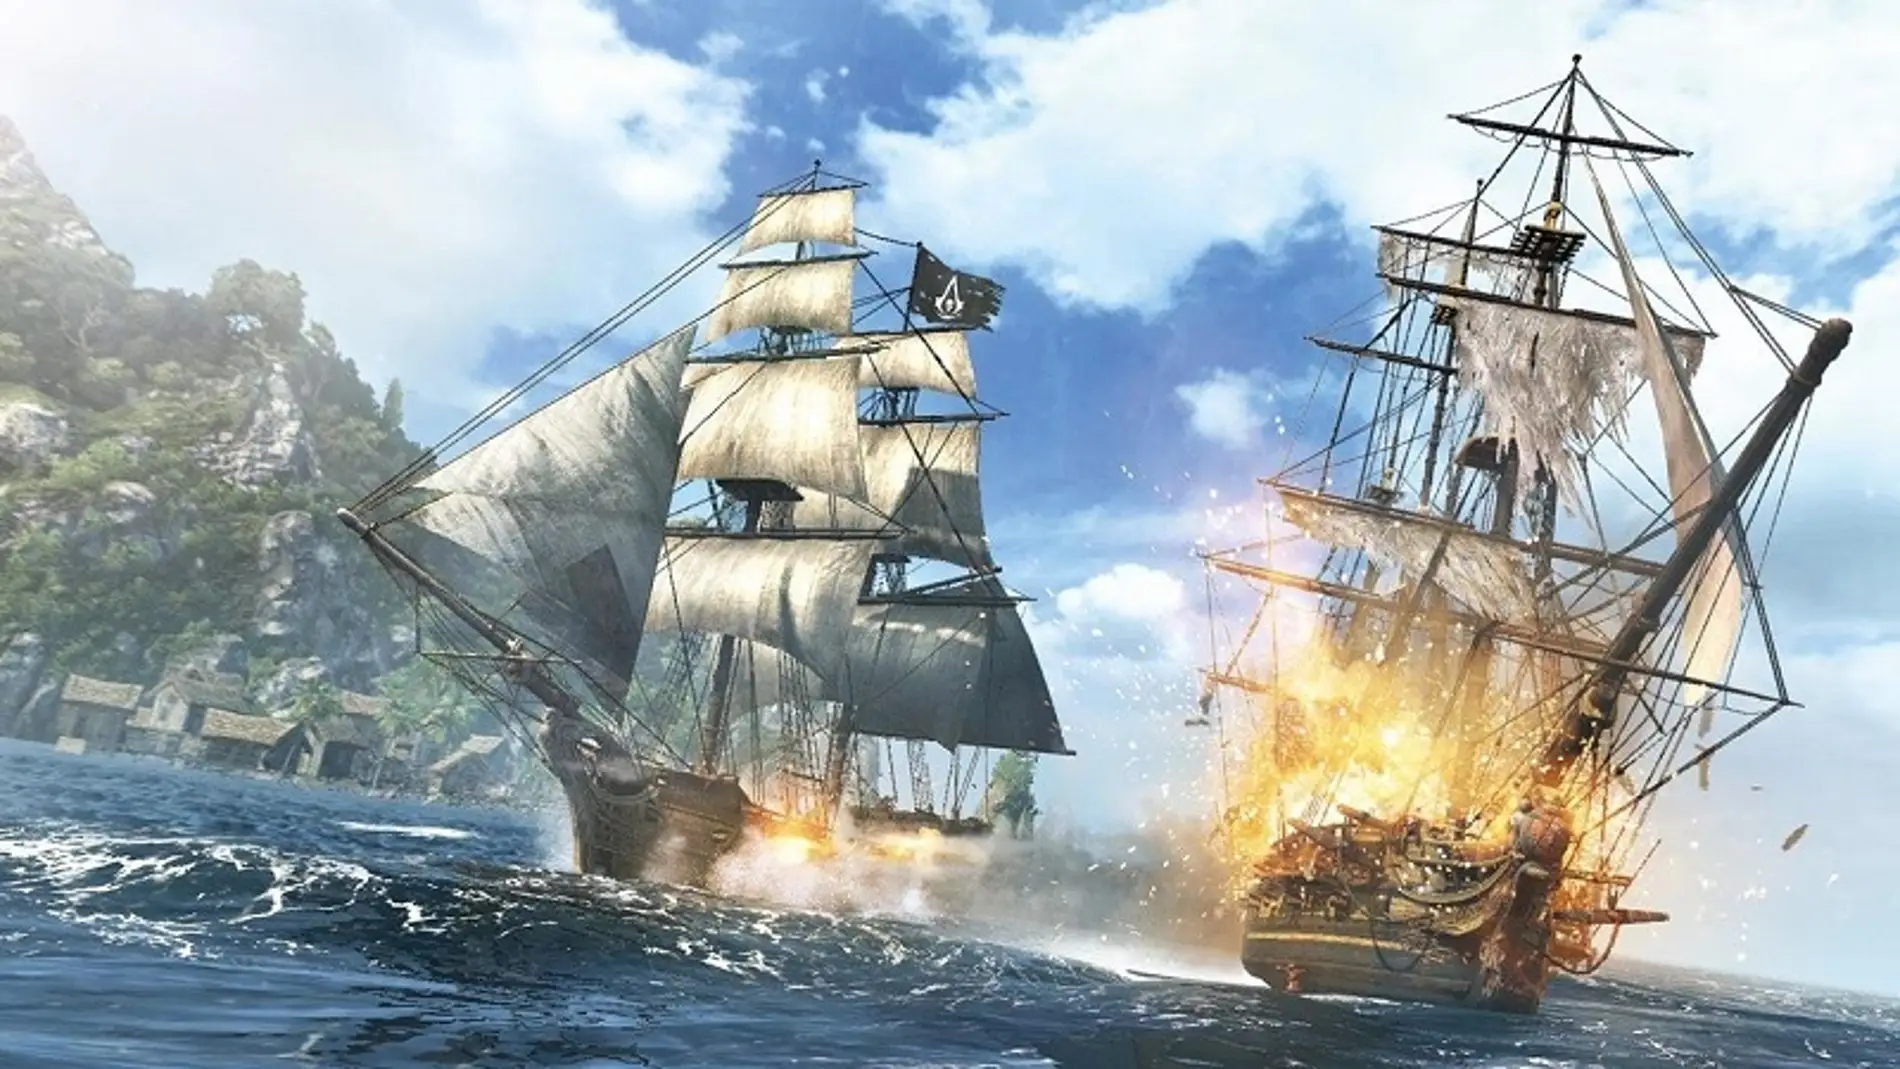  Assassin's Creed Pirates